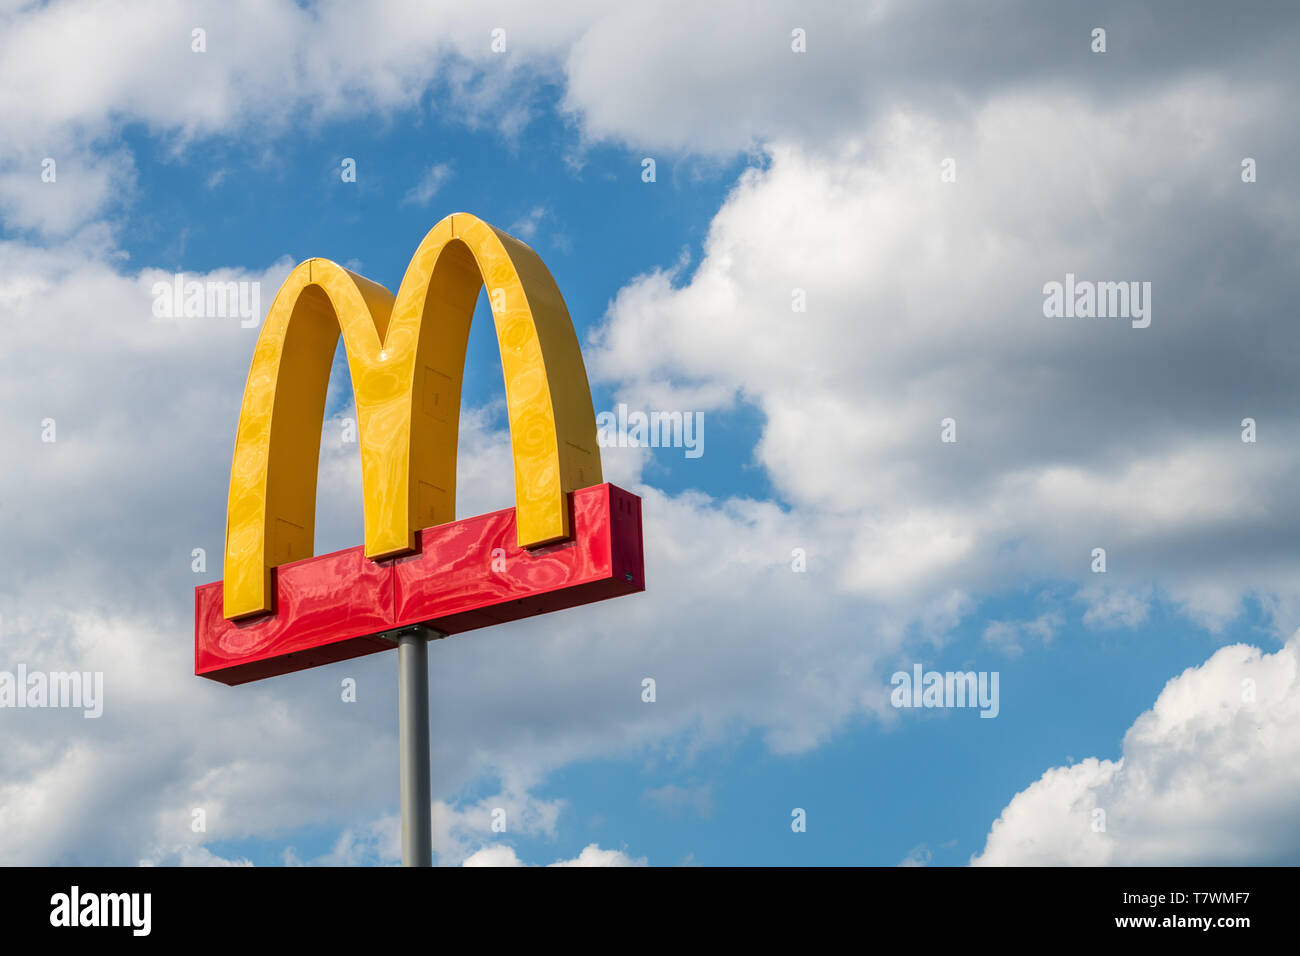 McDonalds sign isolated against cloudy blue sky Stock Photo